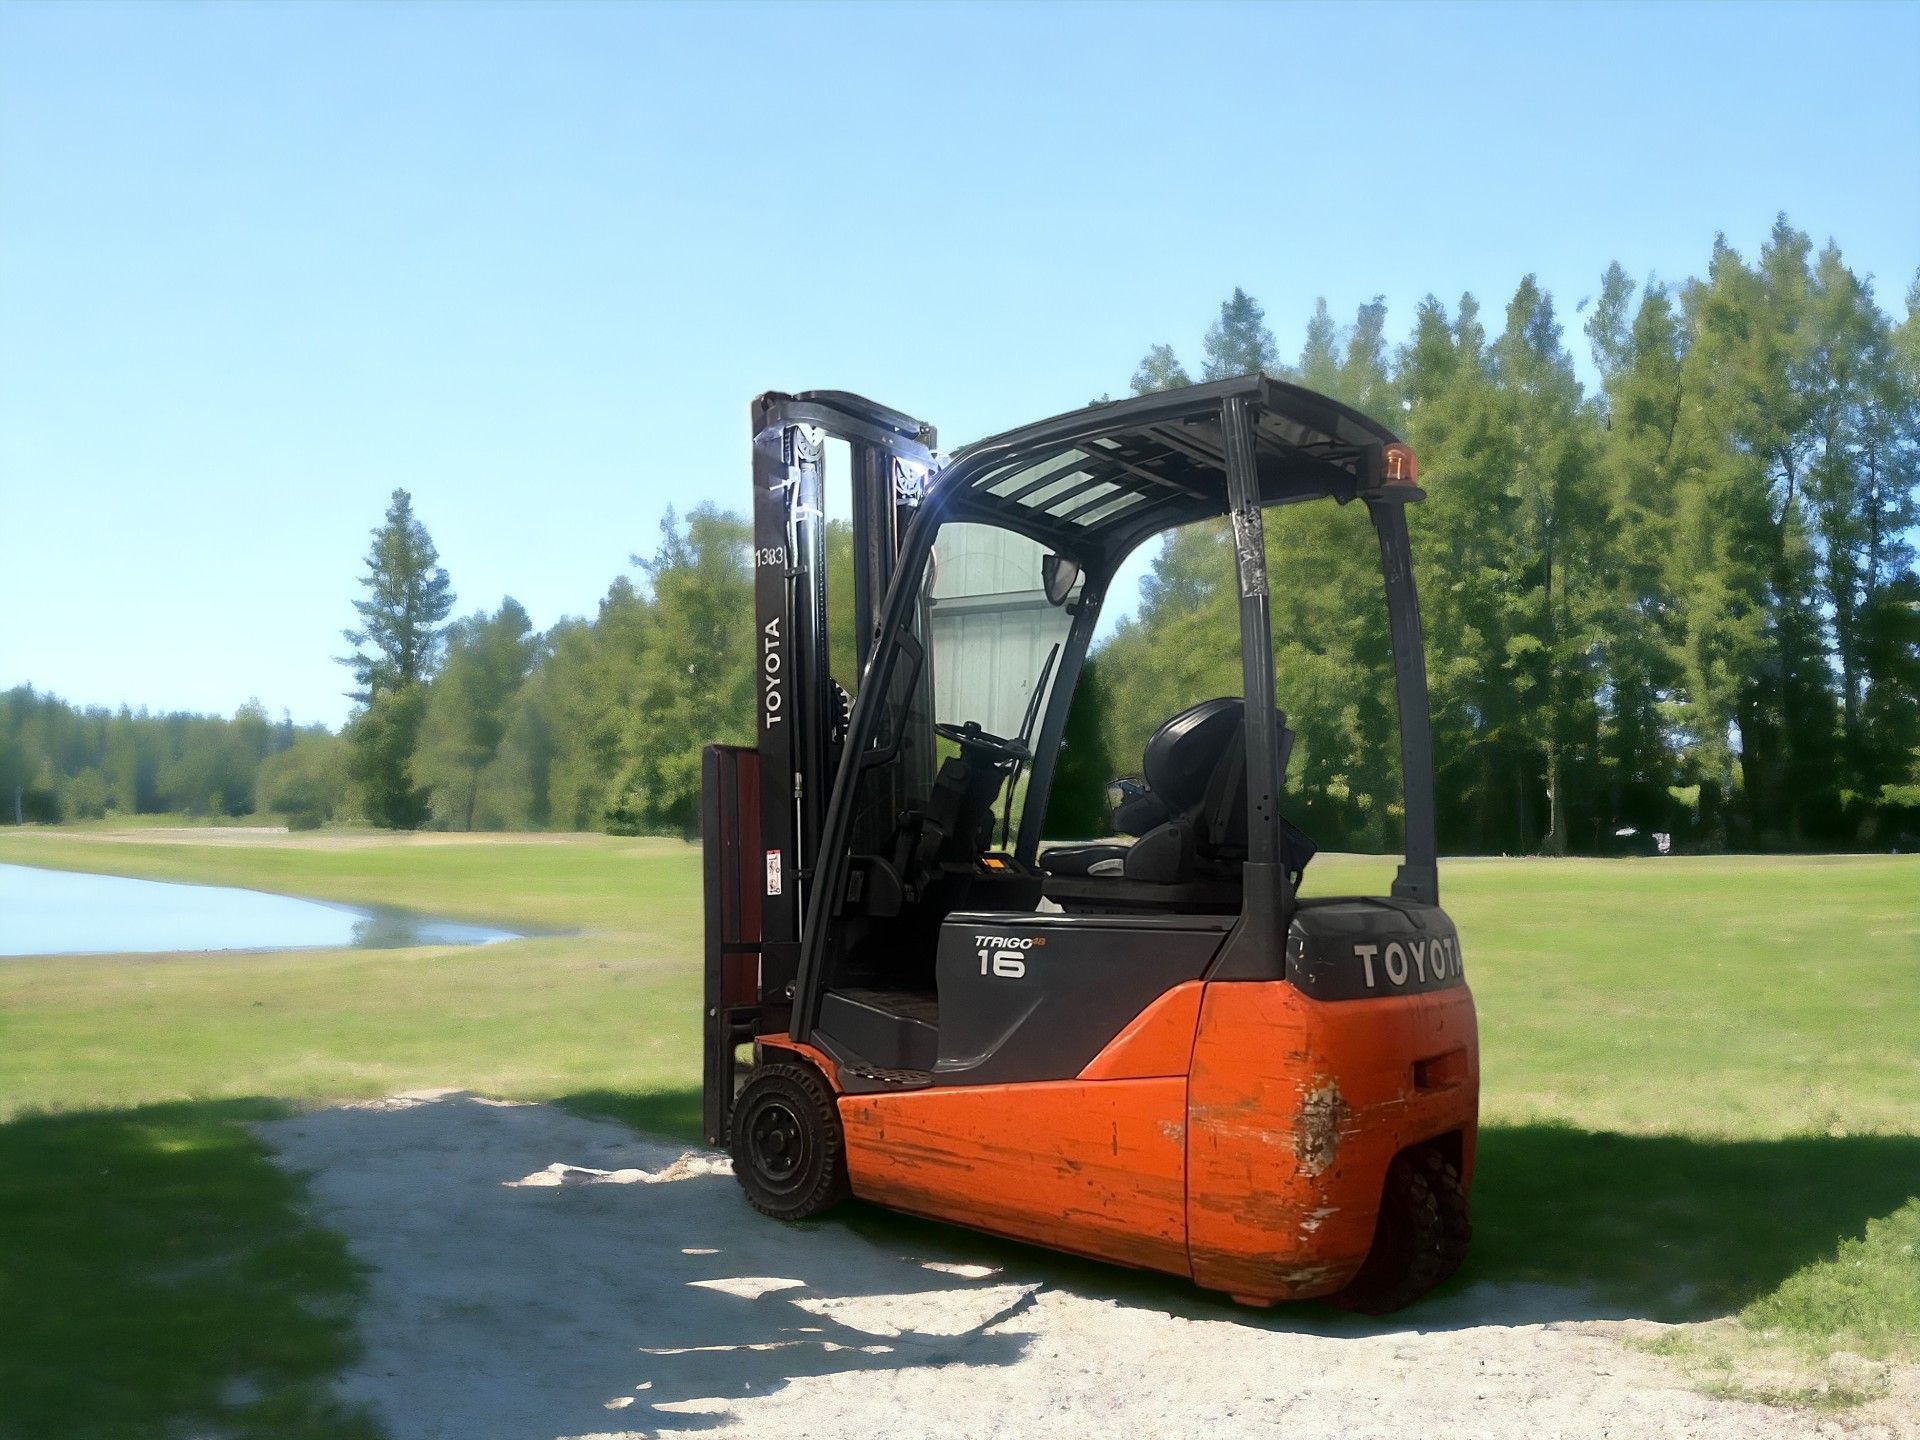 TOYOTA ELECTRIC 3-WHEEL FORKLIFT - 8FBET16 (2012) **(INCLUDES CHARGER)** - Image 5 of 6